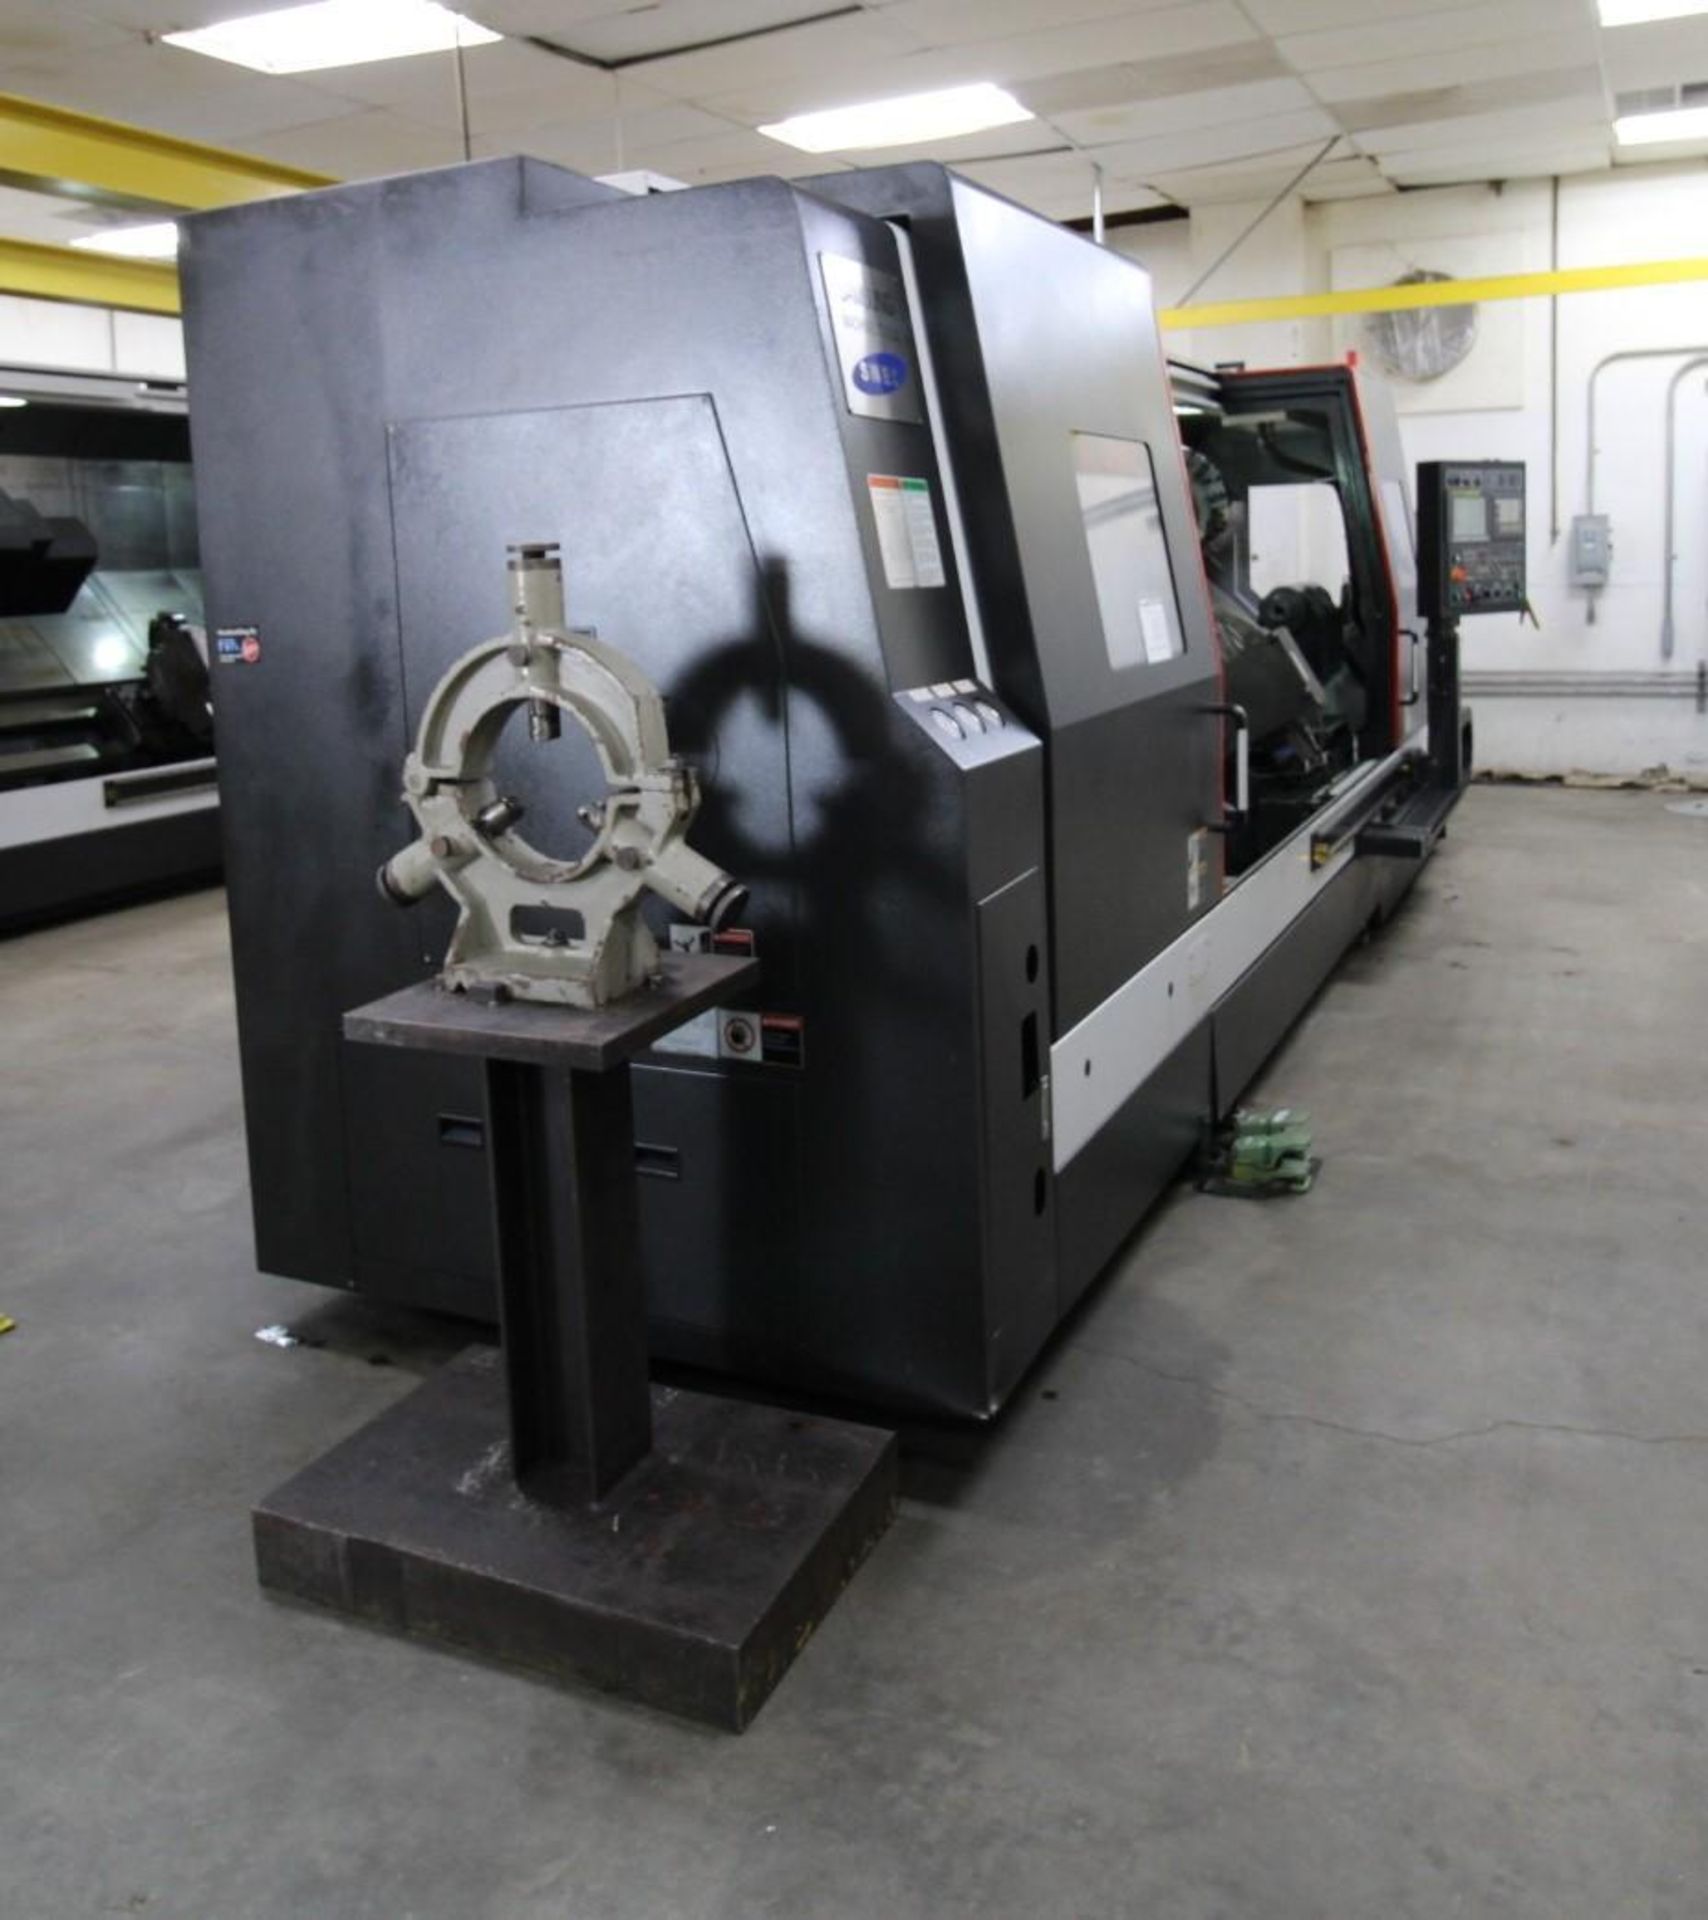 MULTI AXIS CNC MILLING & TURNING CENTER, SAMSUNG MDL. SL-45MC/3000, new 2014, Fanuc Oi-TD control, - Image 7 of 16